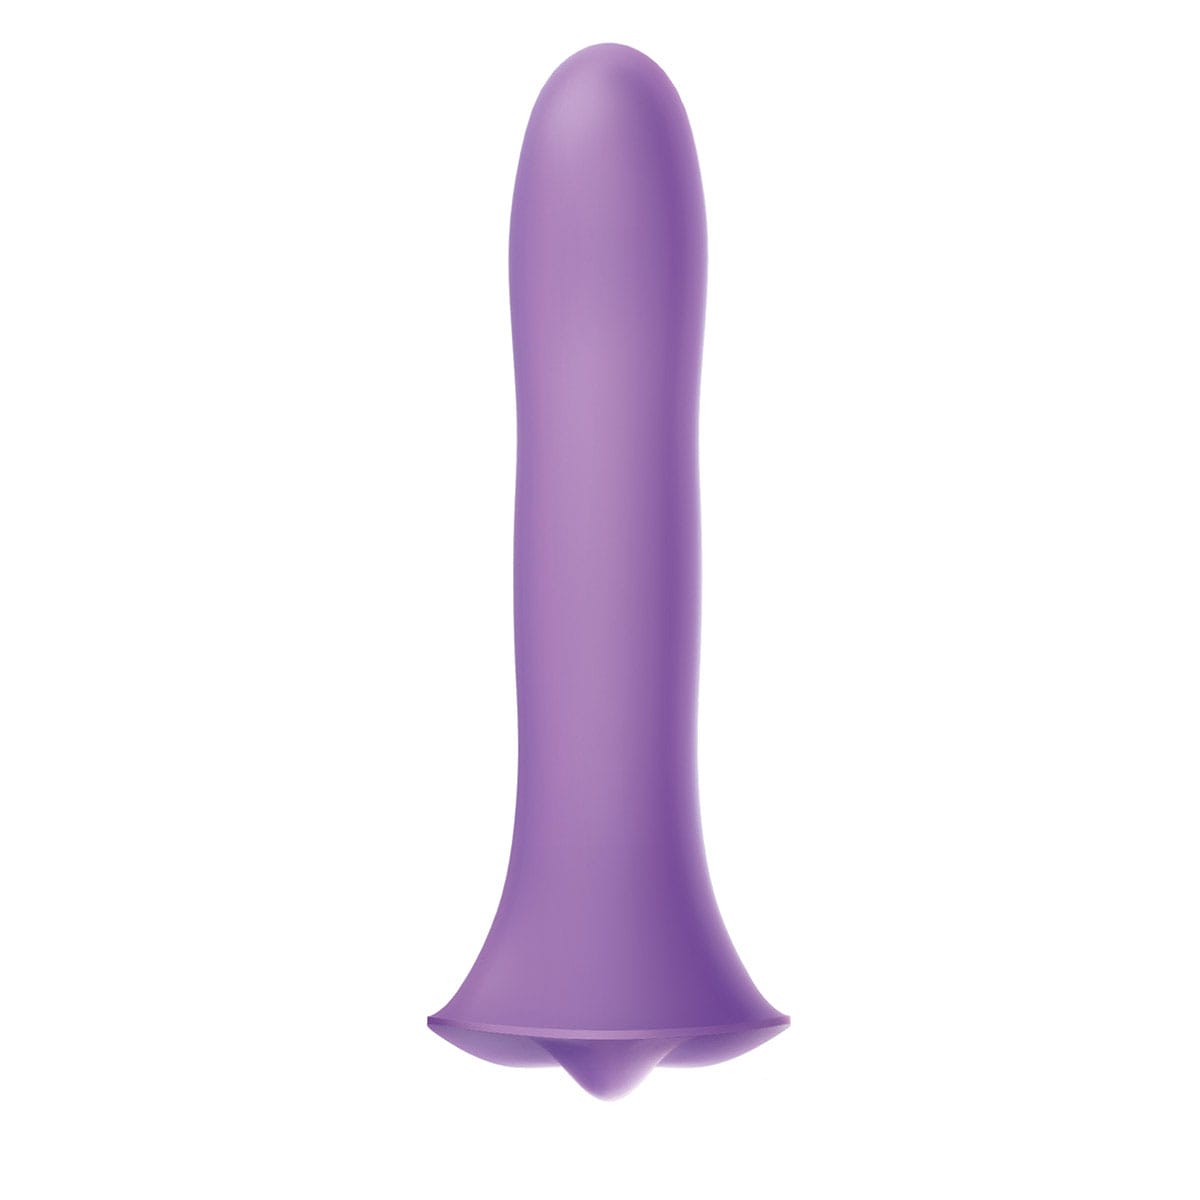 Buy Wet for Her Fusion Dil   Large   Violet 7.4 long and 1.61 thick dildo made by Wet For Her.